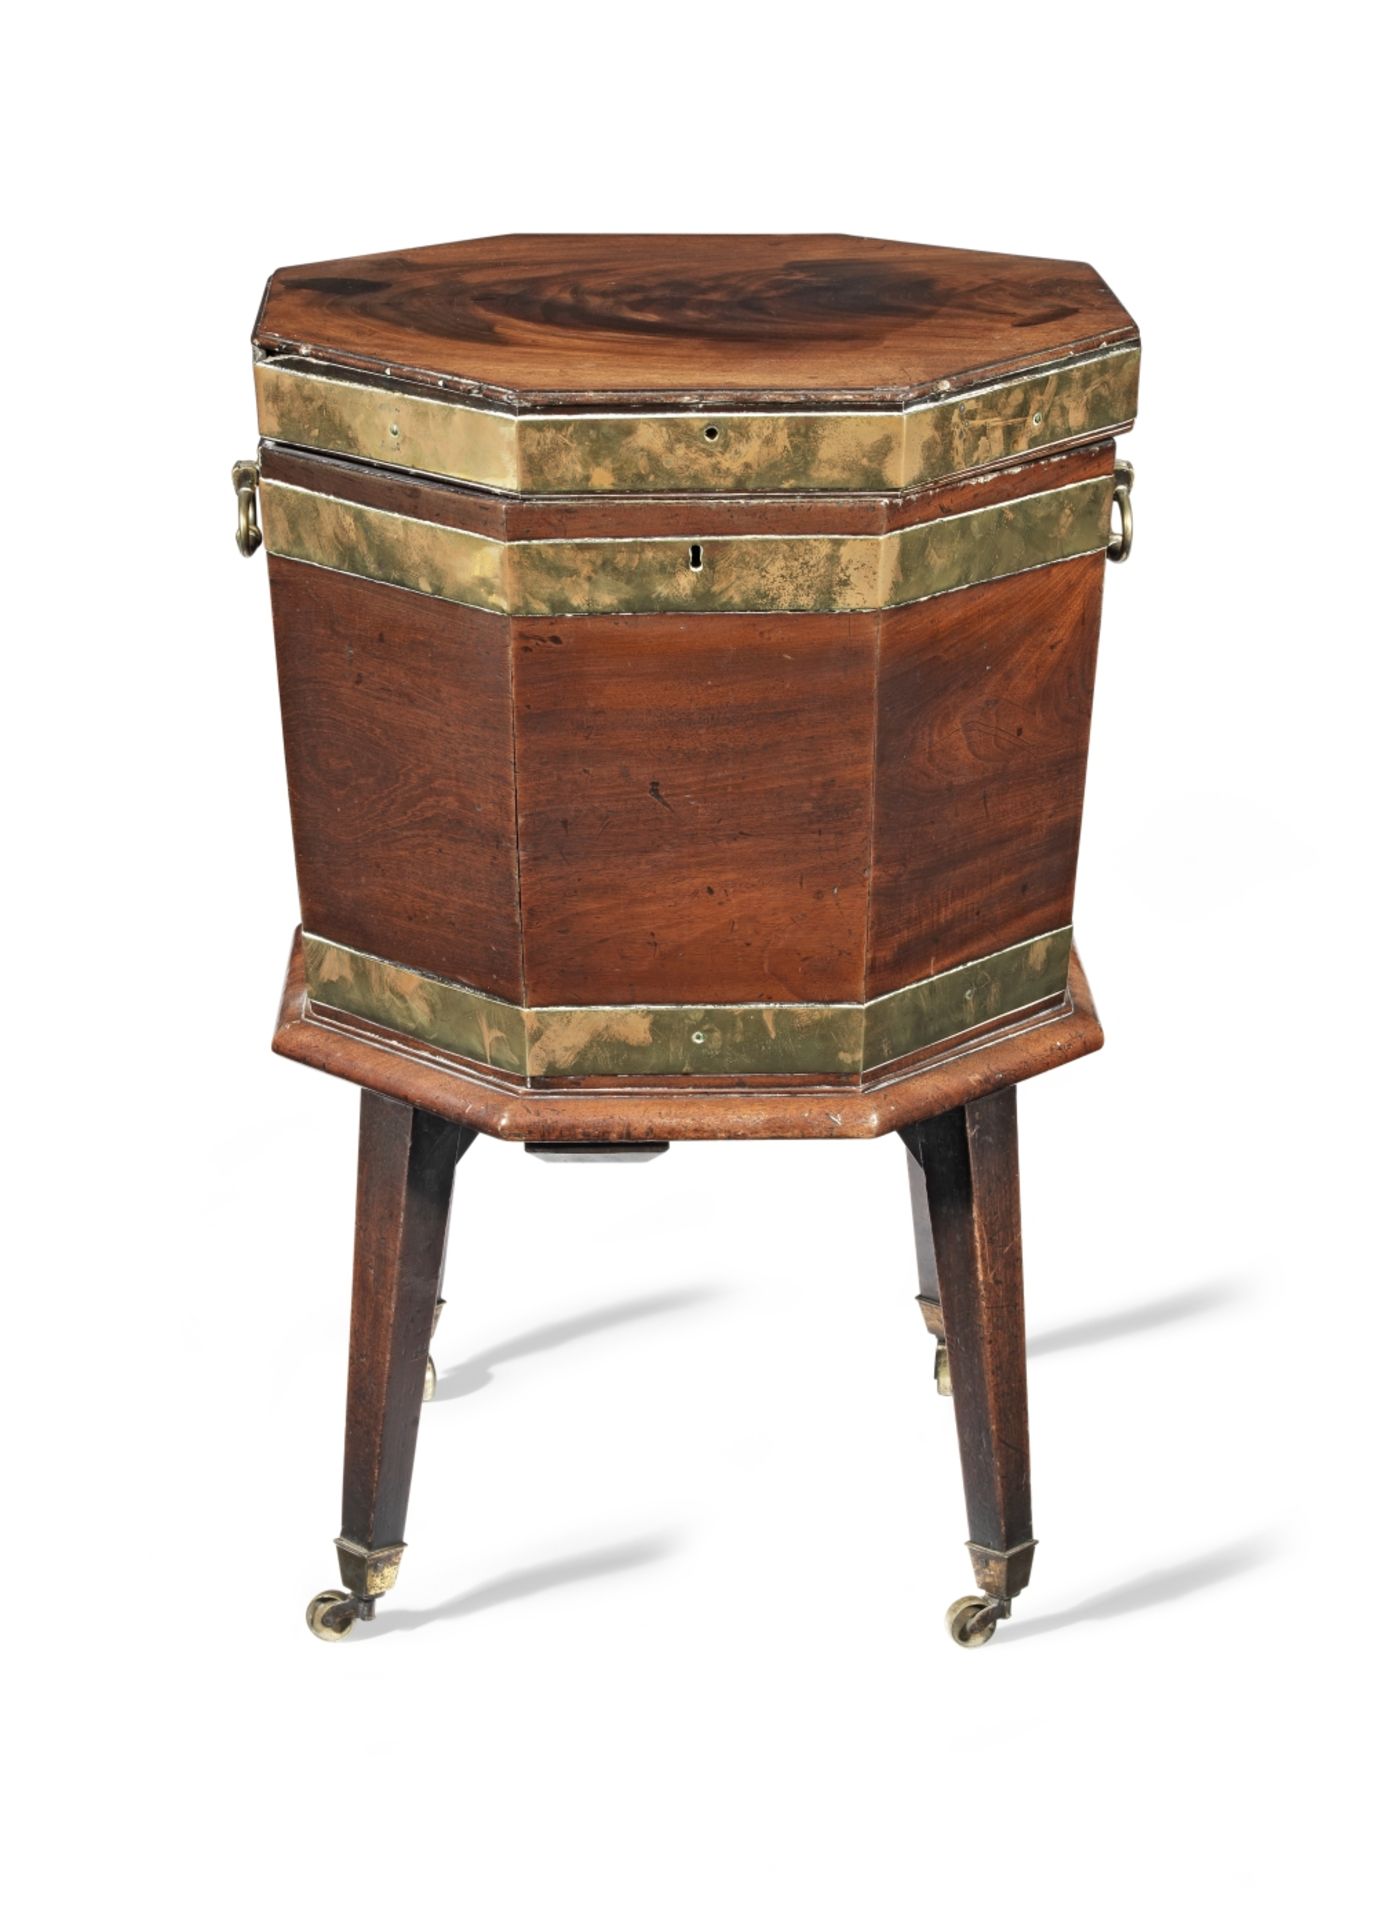 A late George III mahogany and brass mounted octagonal cellaret